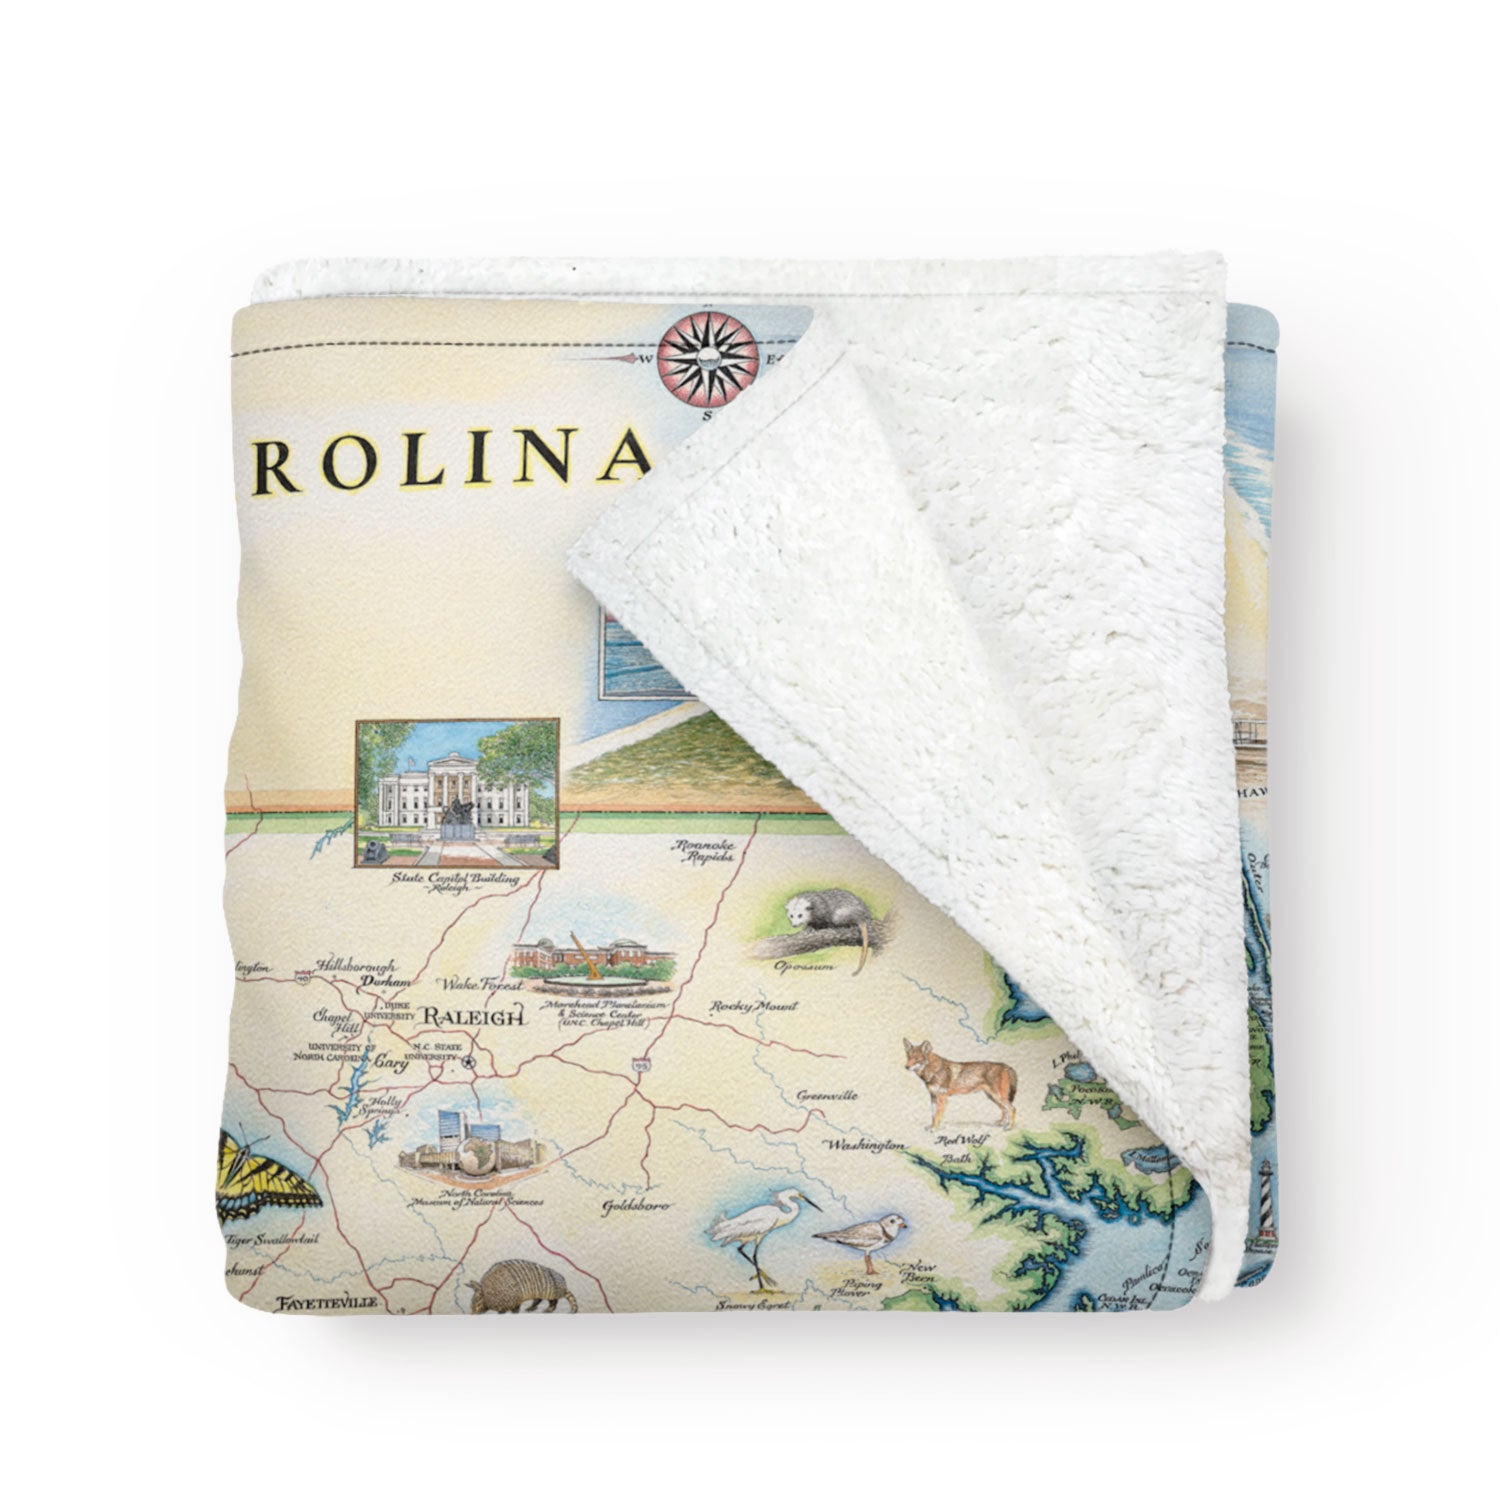 Folded blanket depicting a map of North Carolina. The blanket is soft and cozy fleece and measures 58